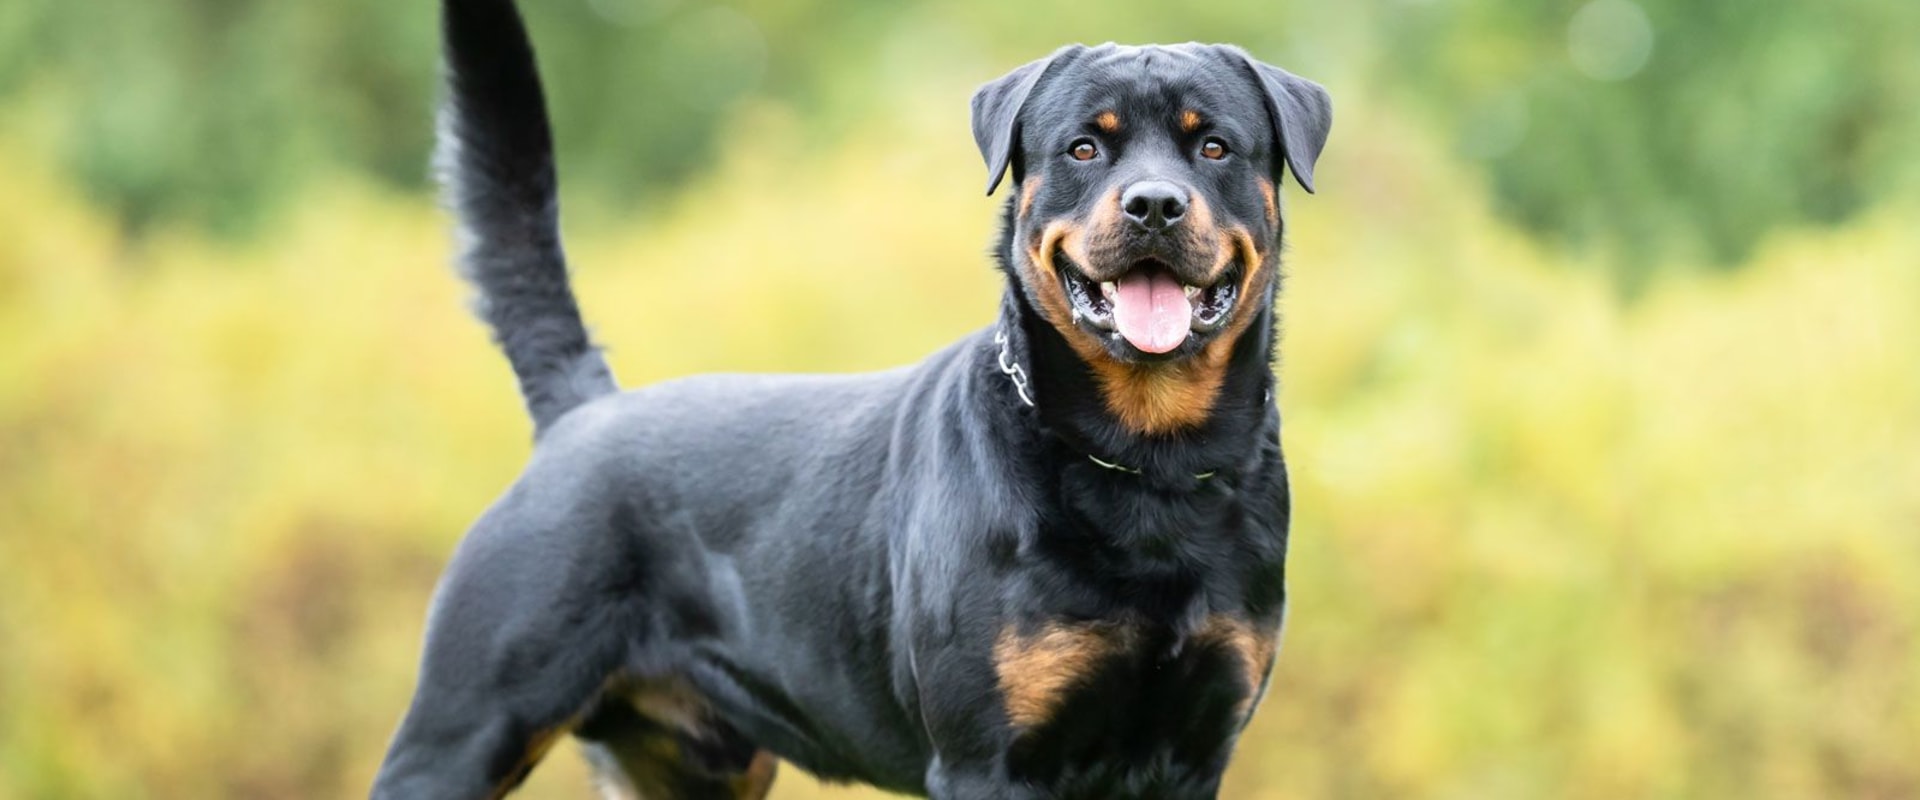 Where is rottweiler dog from?